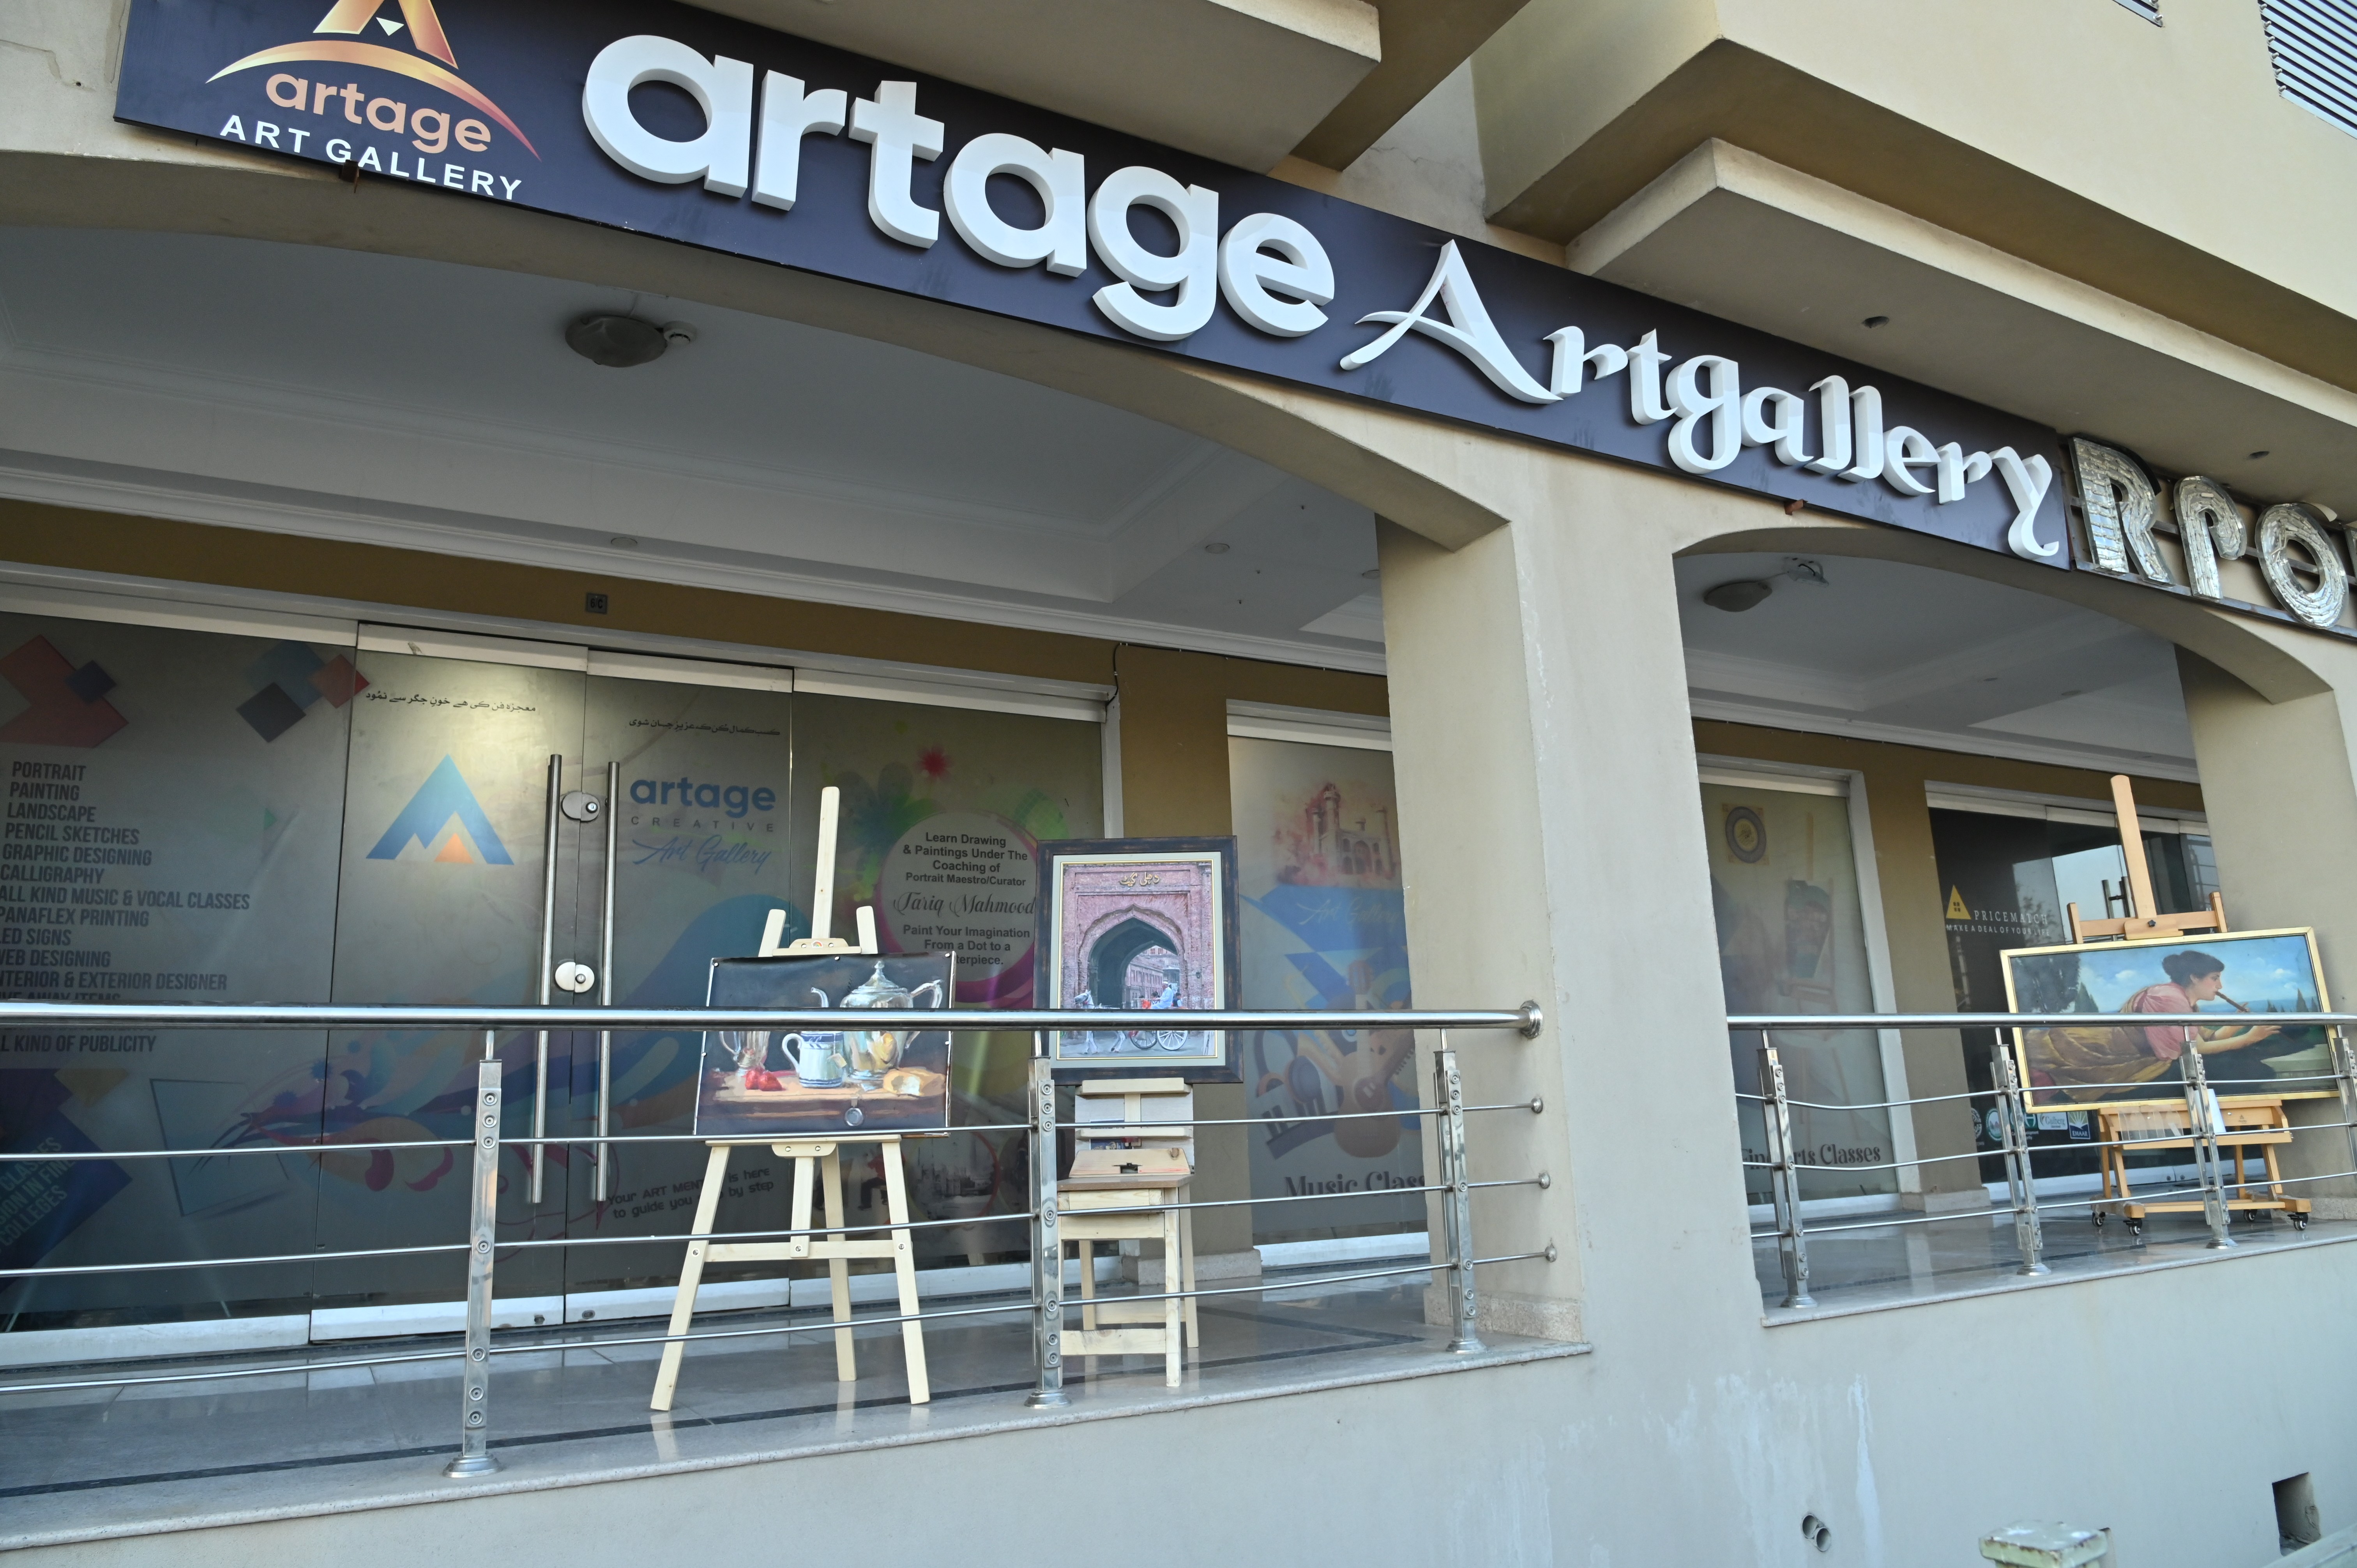 The artage art gallery in Bahria Town